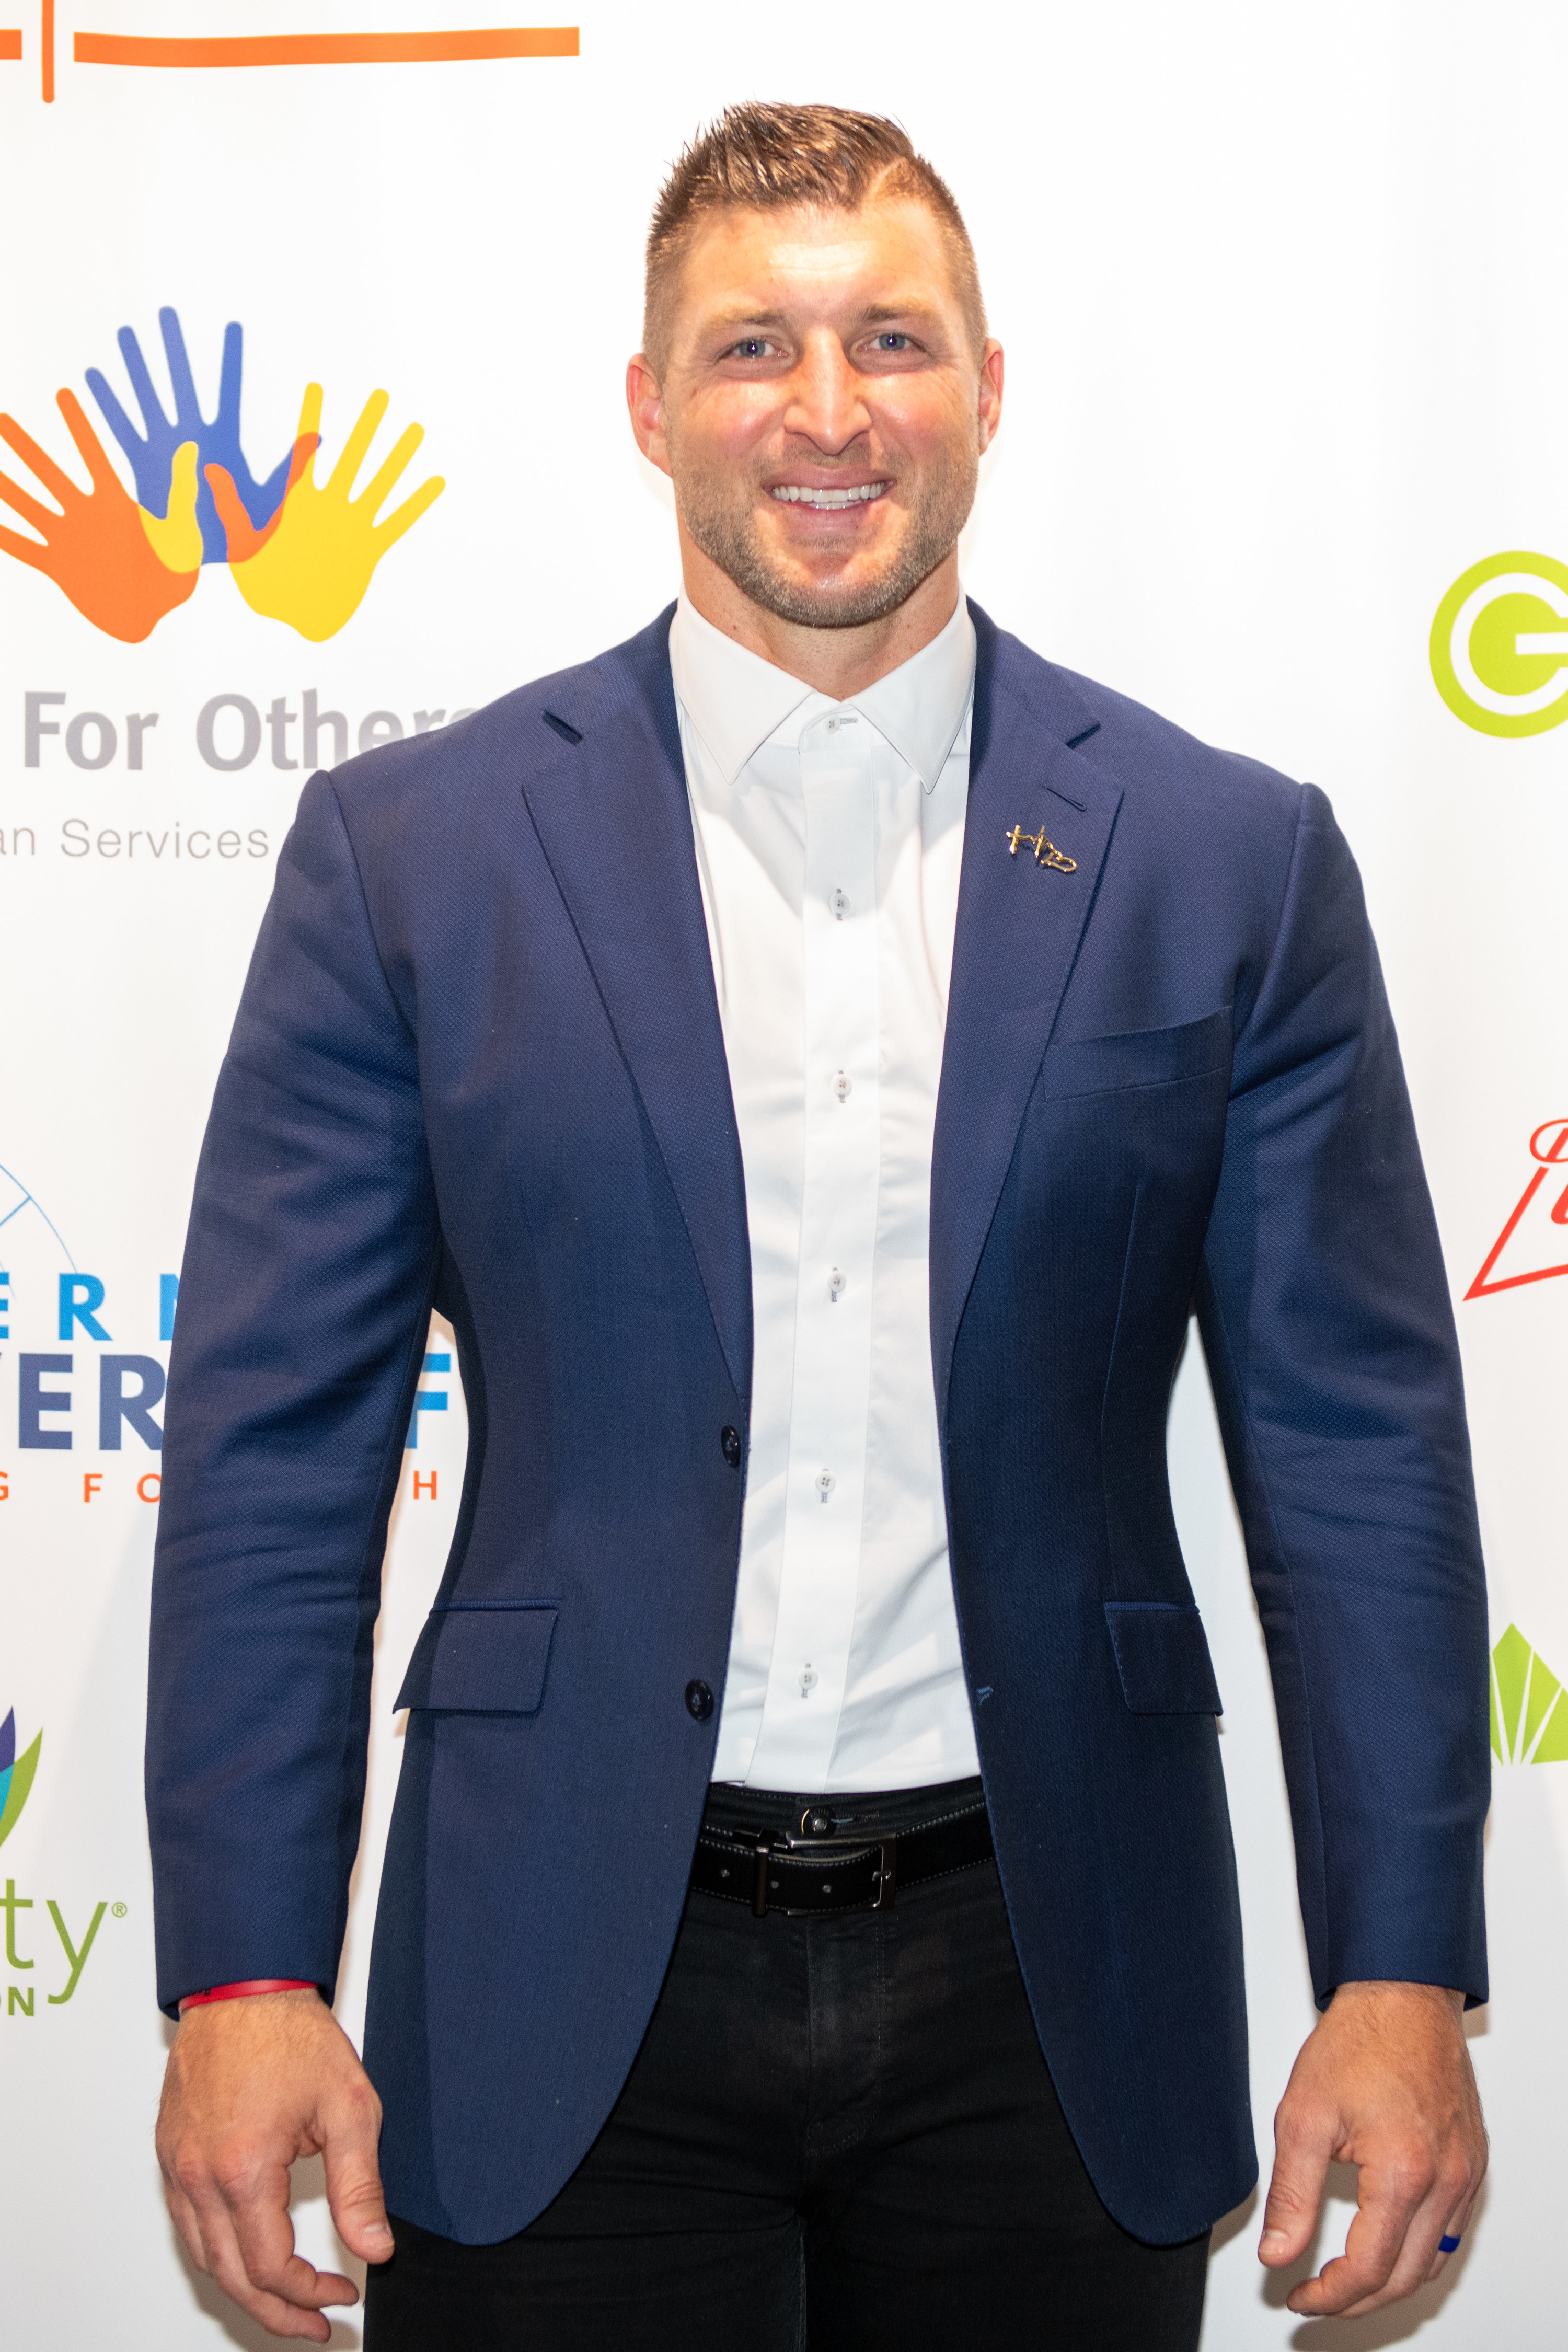 Tim Tebow is photographed at the International Poverty Forum on March 04, 2022